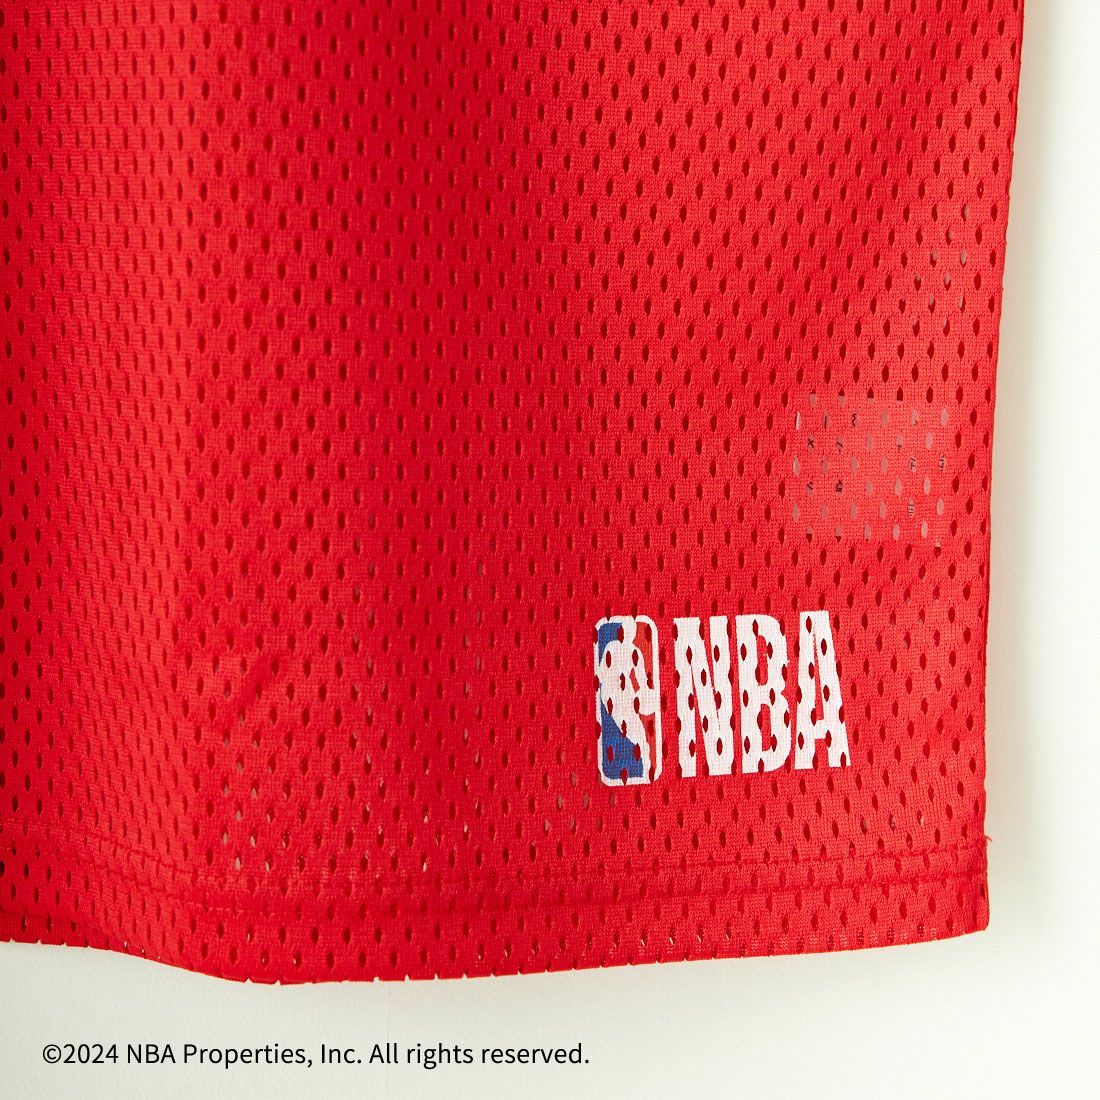 OFF THE COURT BY NBA [オフ ザ コート バイ エヌビーエー] 別注 メッシュTシャツ [JF-24SS-001-JF] RED BULLS